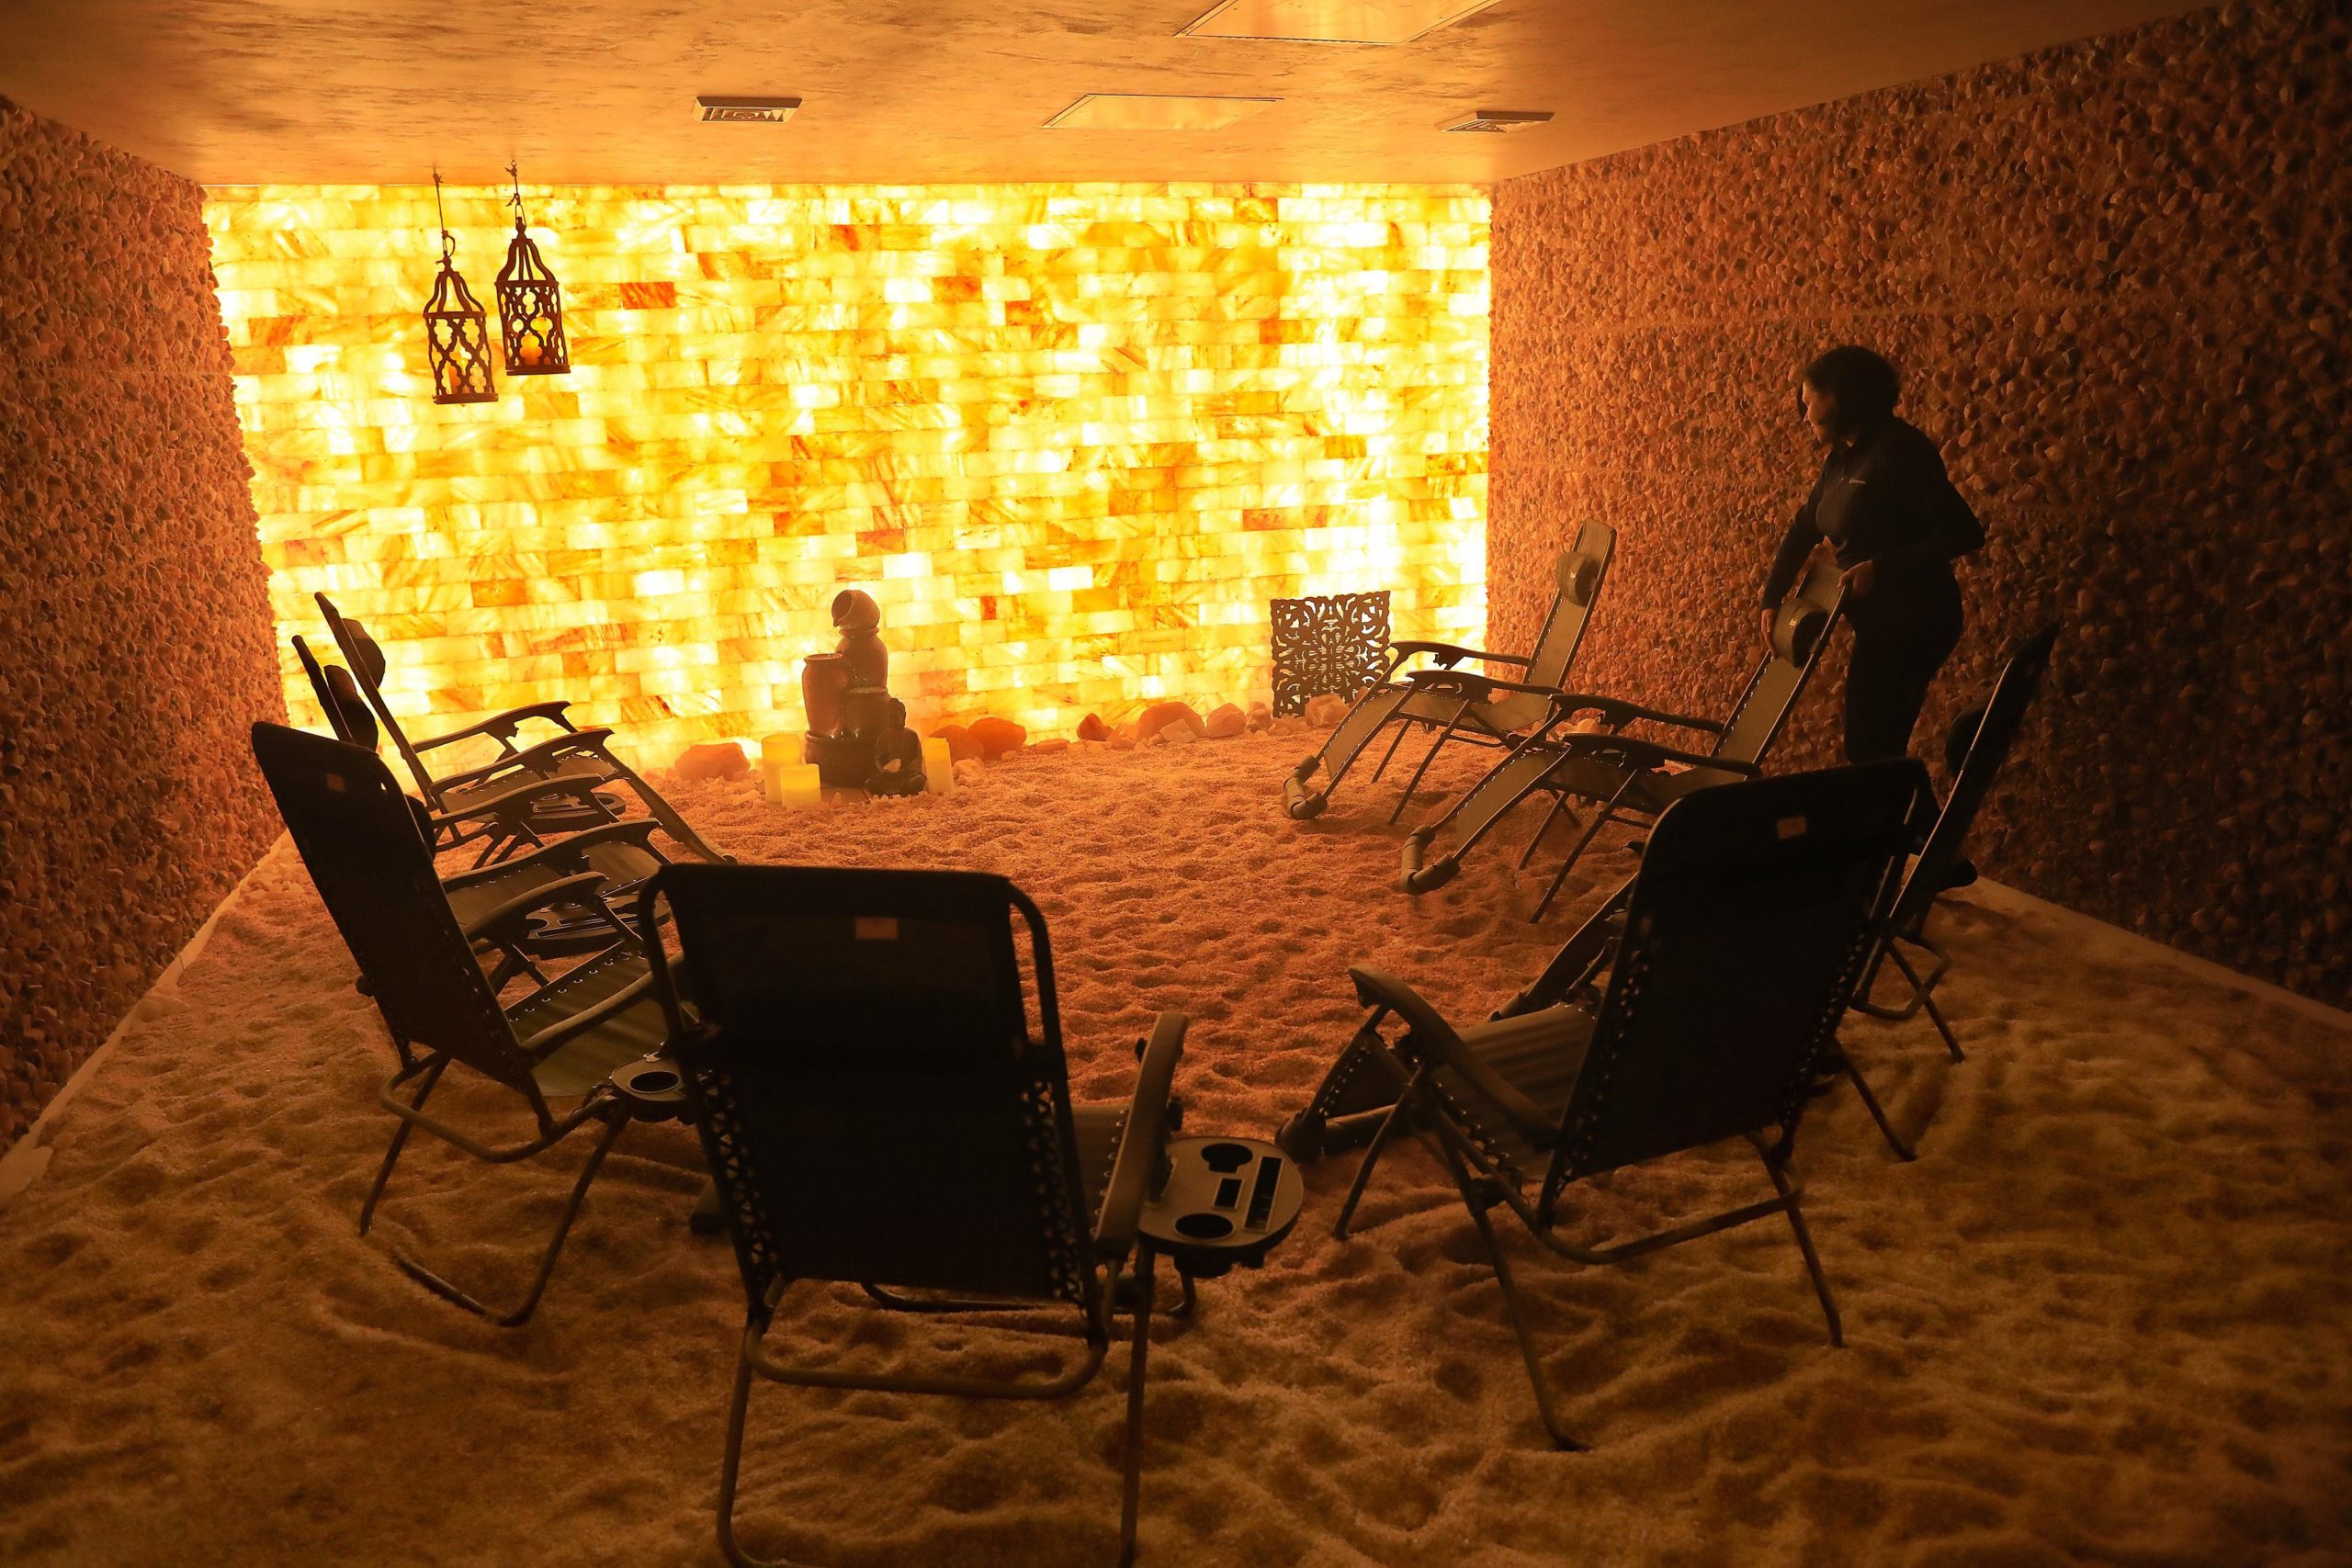 Eight Reclining Lounge Chairs On A Salt-Covered Floor Surrounded By Salt Panels And An Led Lit Salt Brick Wall With A Woman Fixing A Chair.